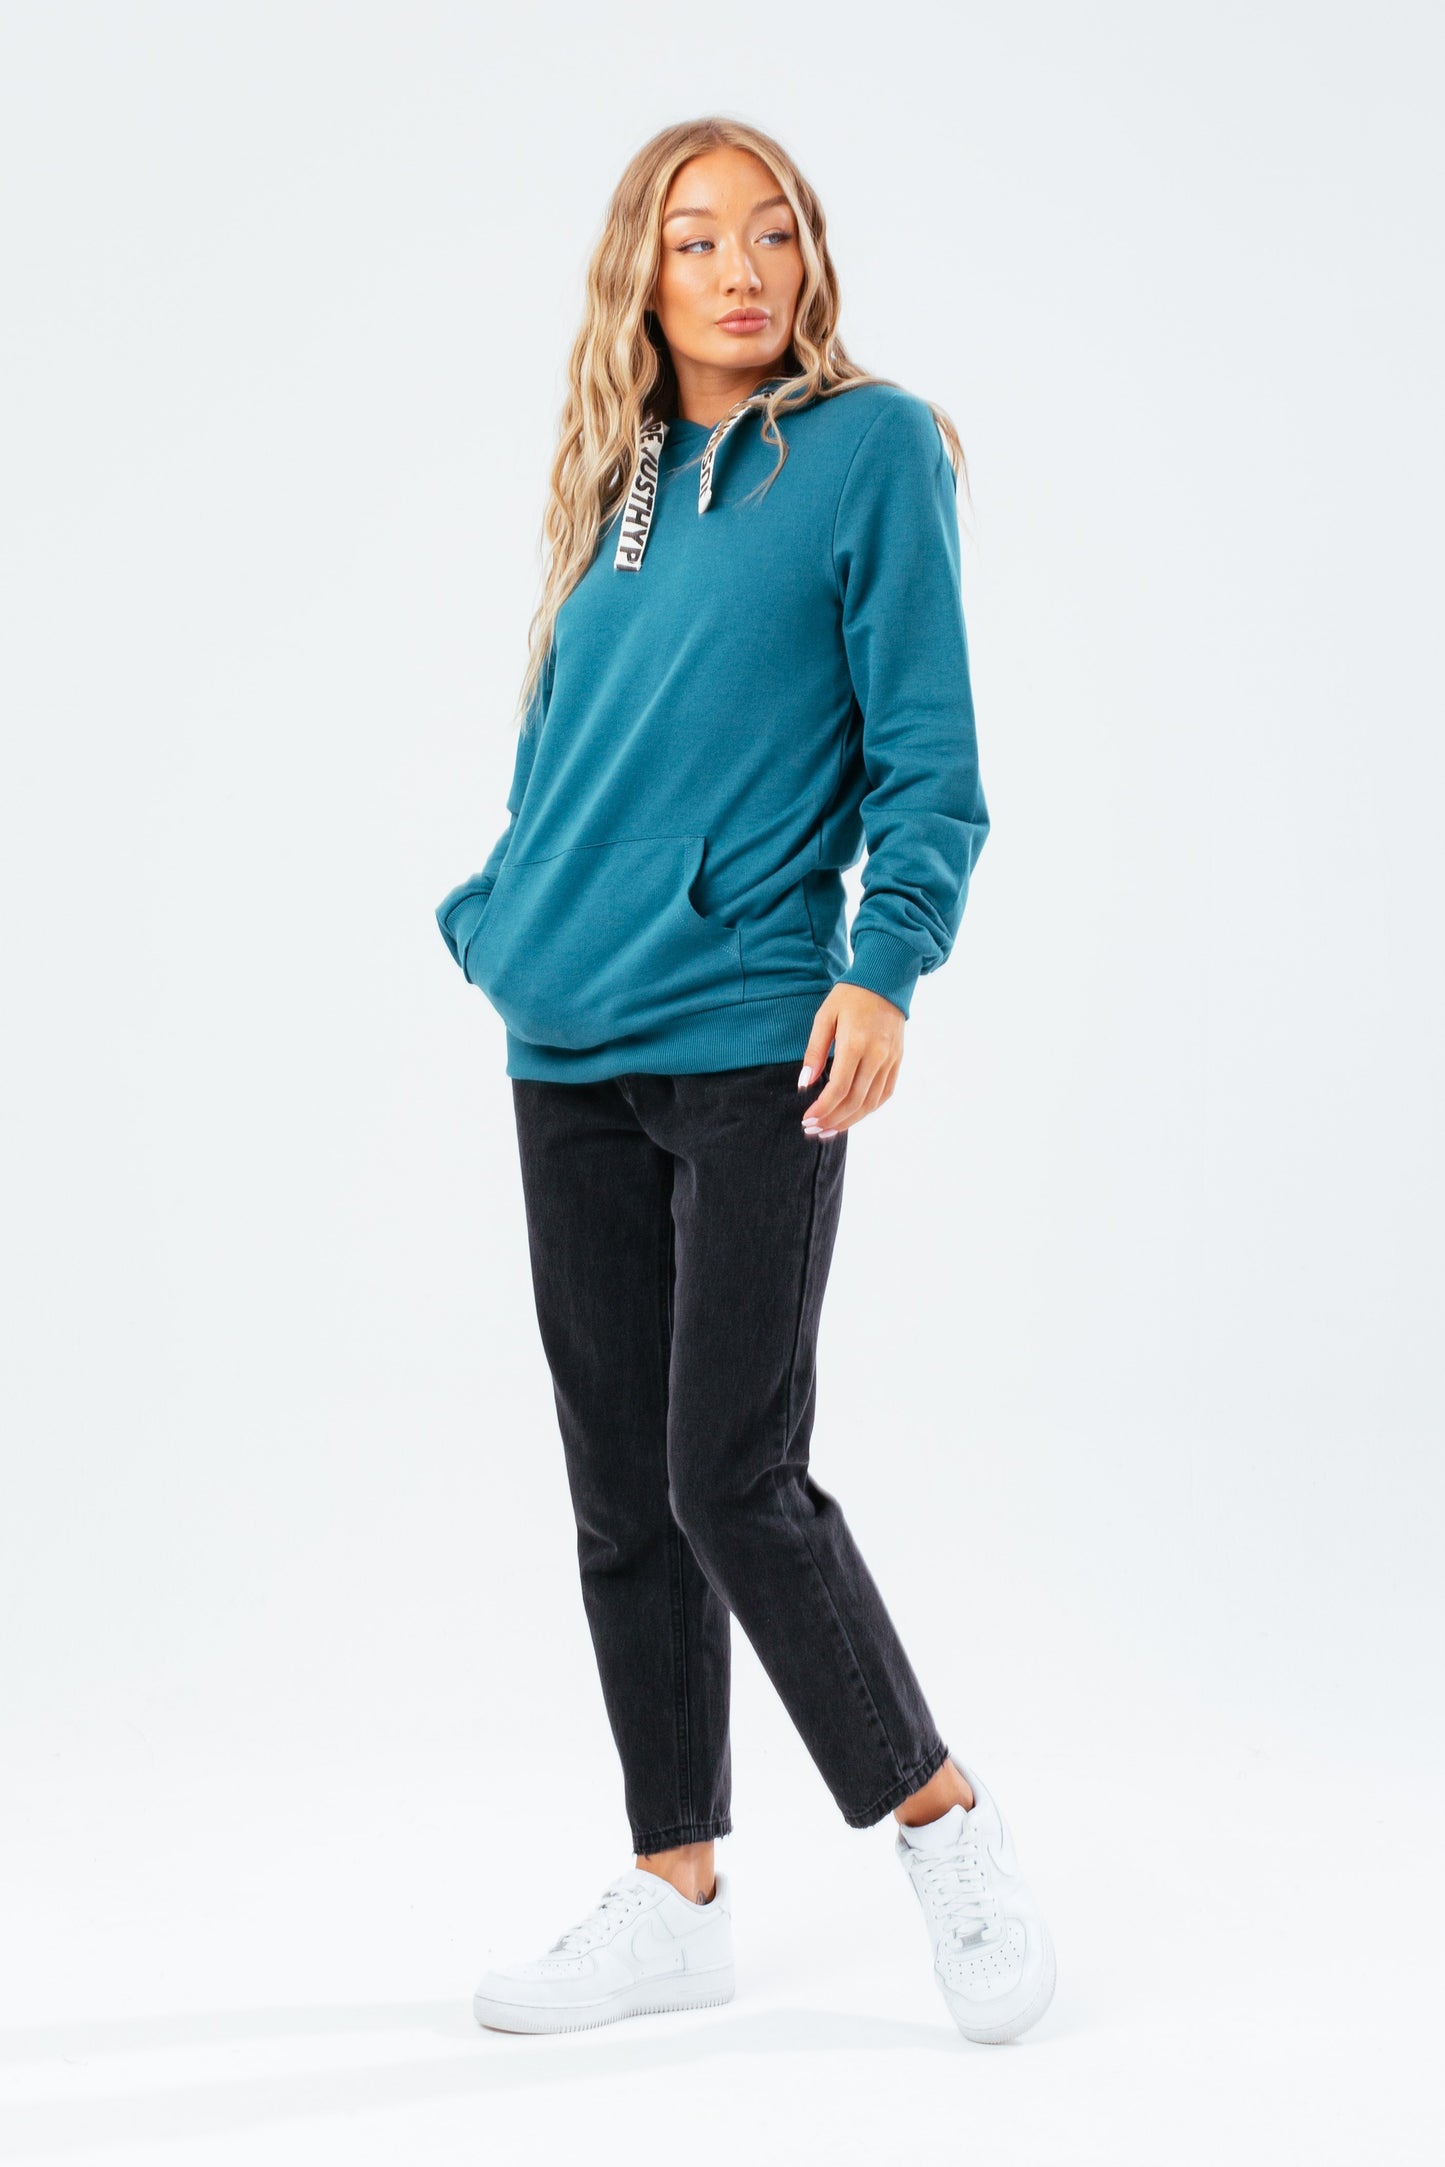 HYPE TEAL DRAWSTRING WOMEN'S PULLOVER HOODIE